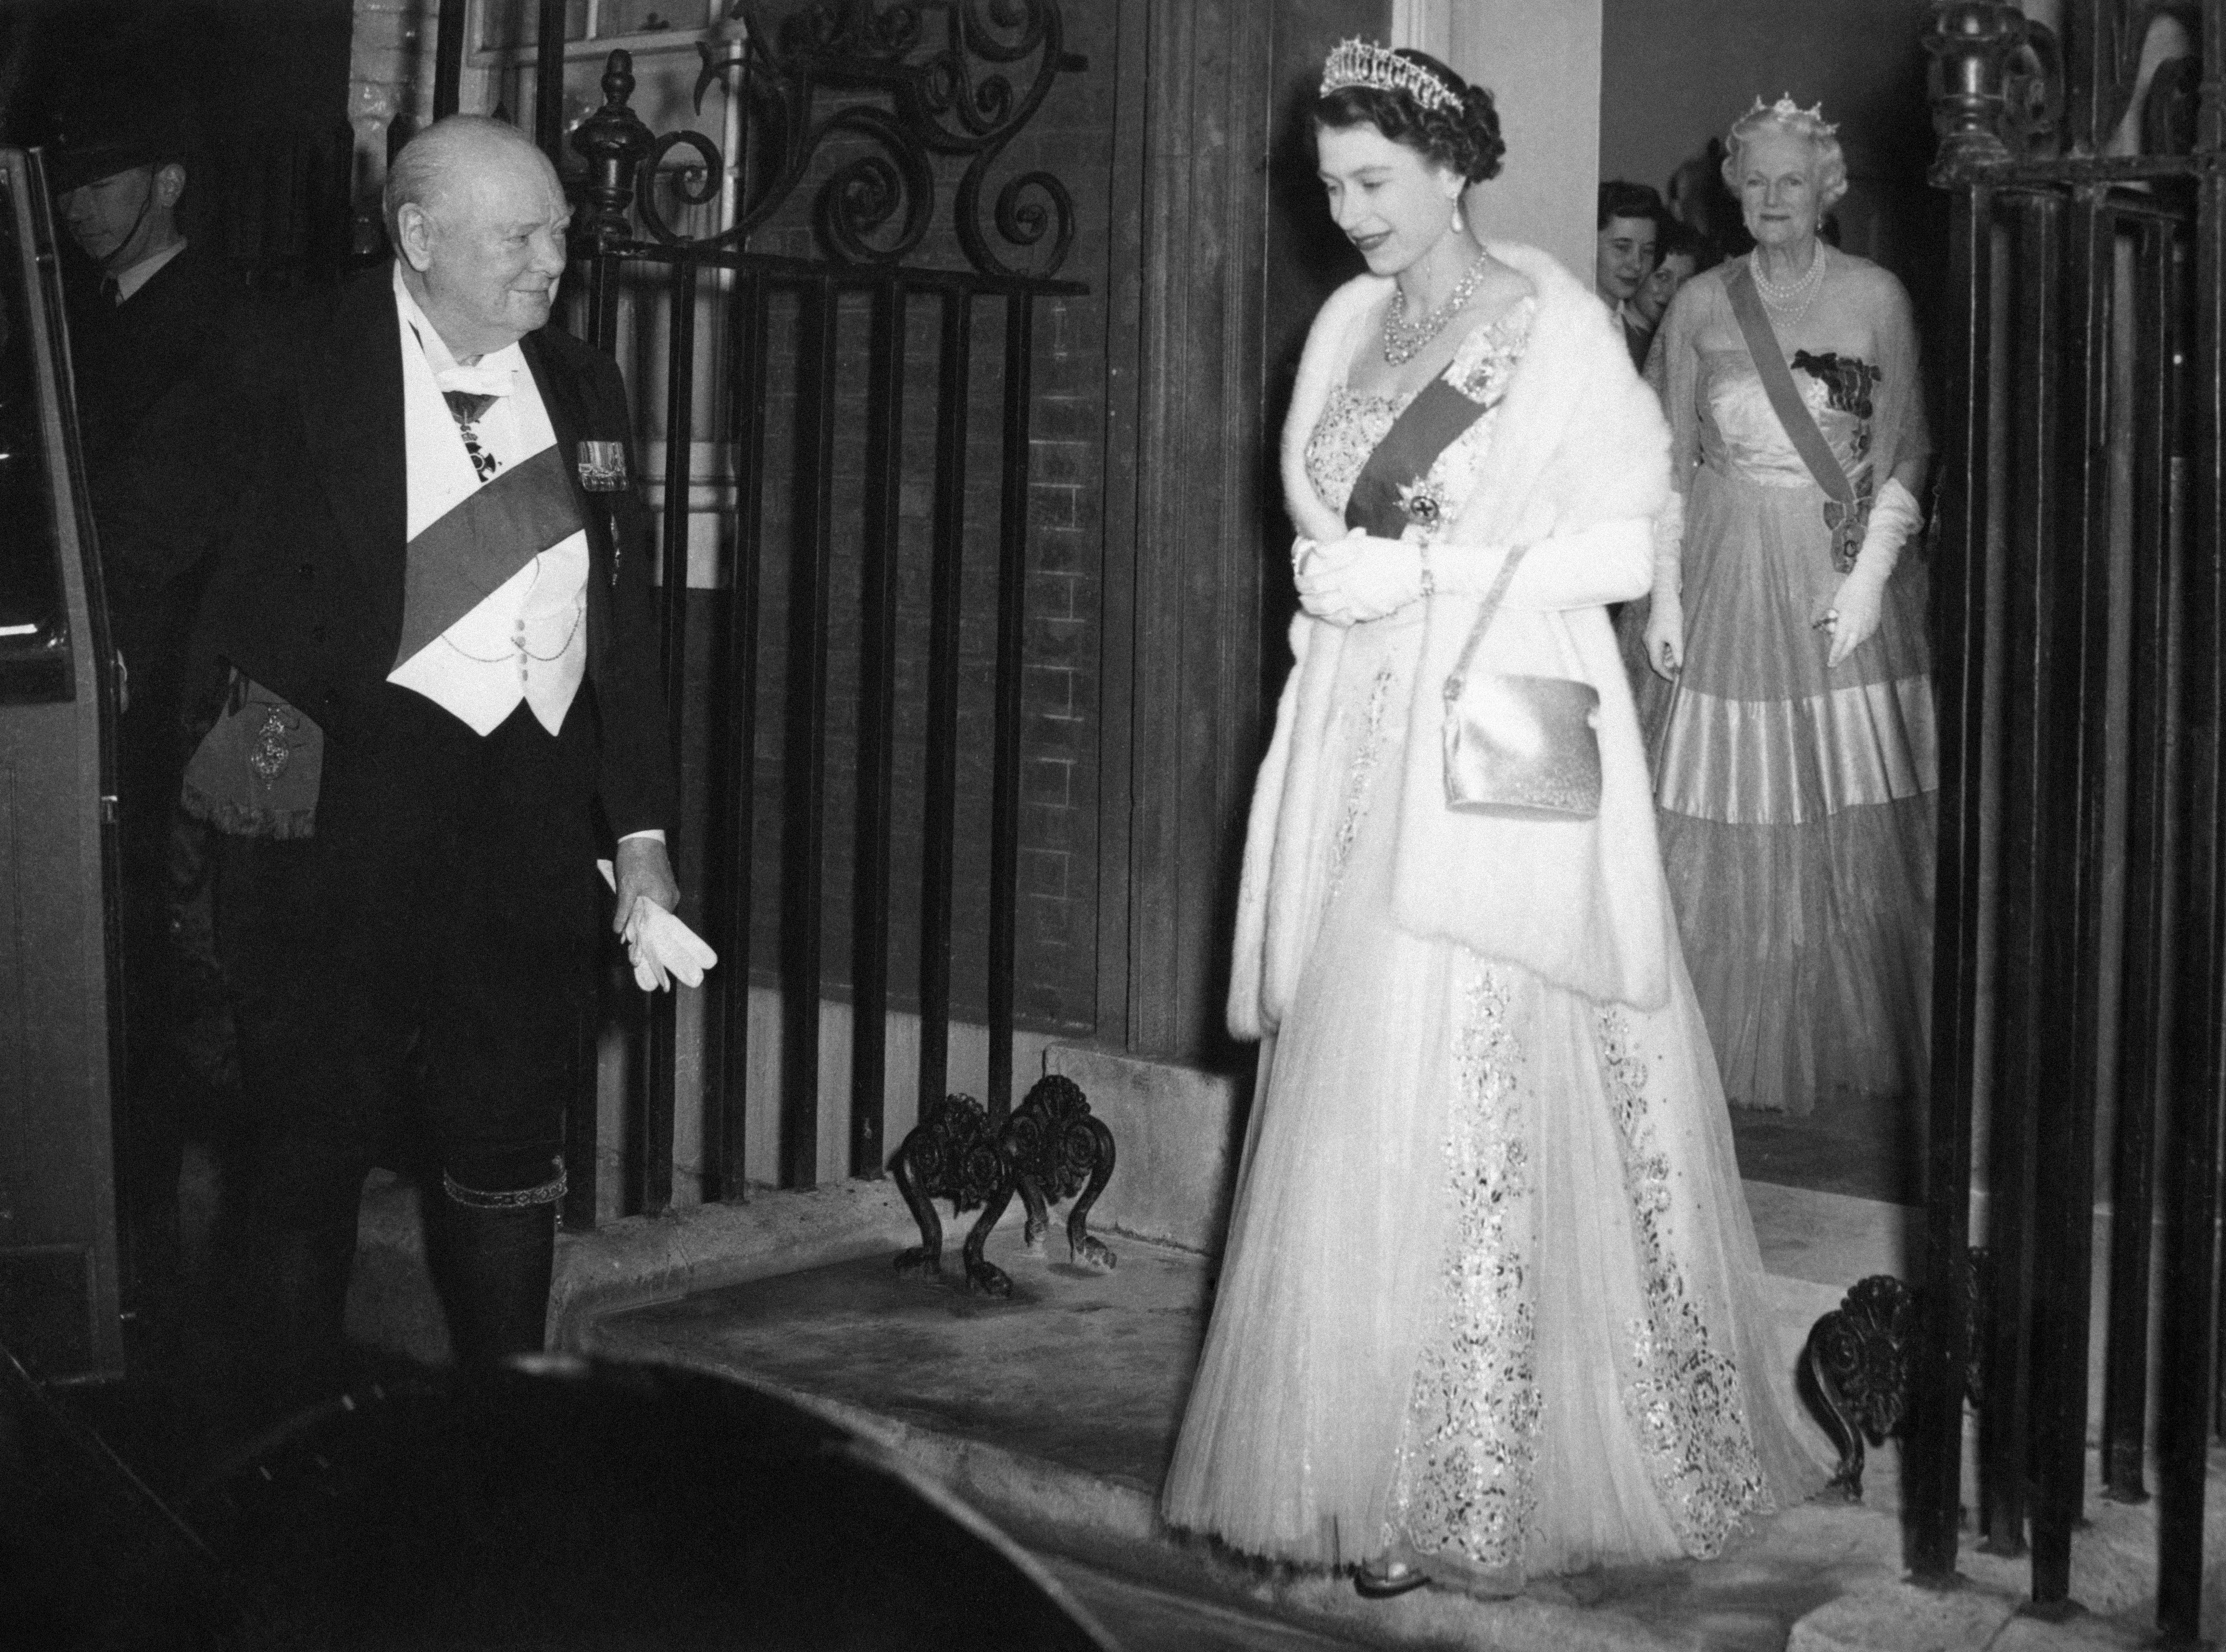 Sir Winston Churchill opening the door of Queen Elizabeth’s car, as she and the Duke of Edinburgh leave after dining with him and other guests in April 1955 (PA Wire/PA Images)